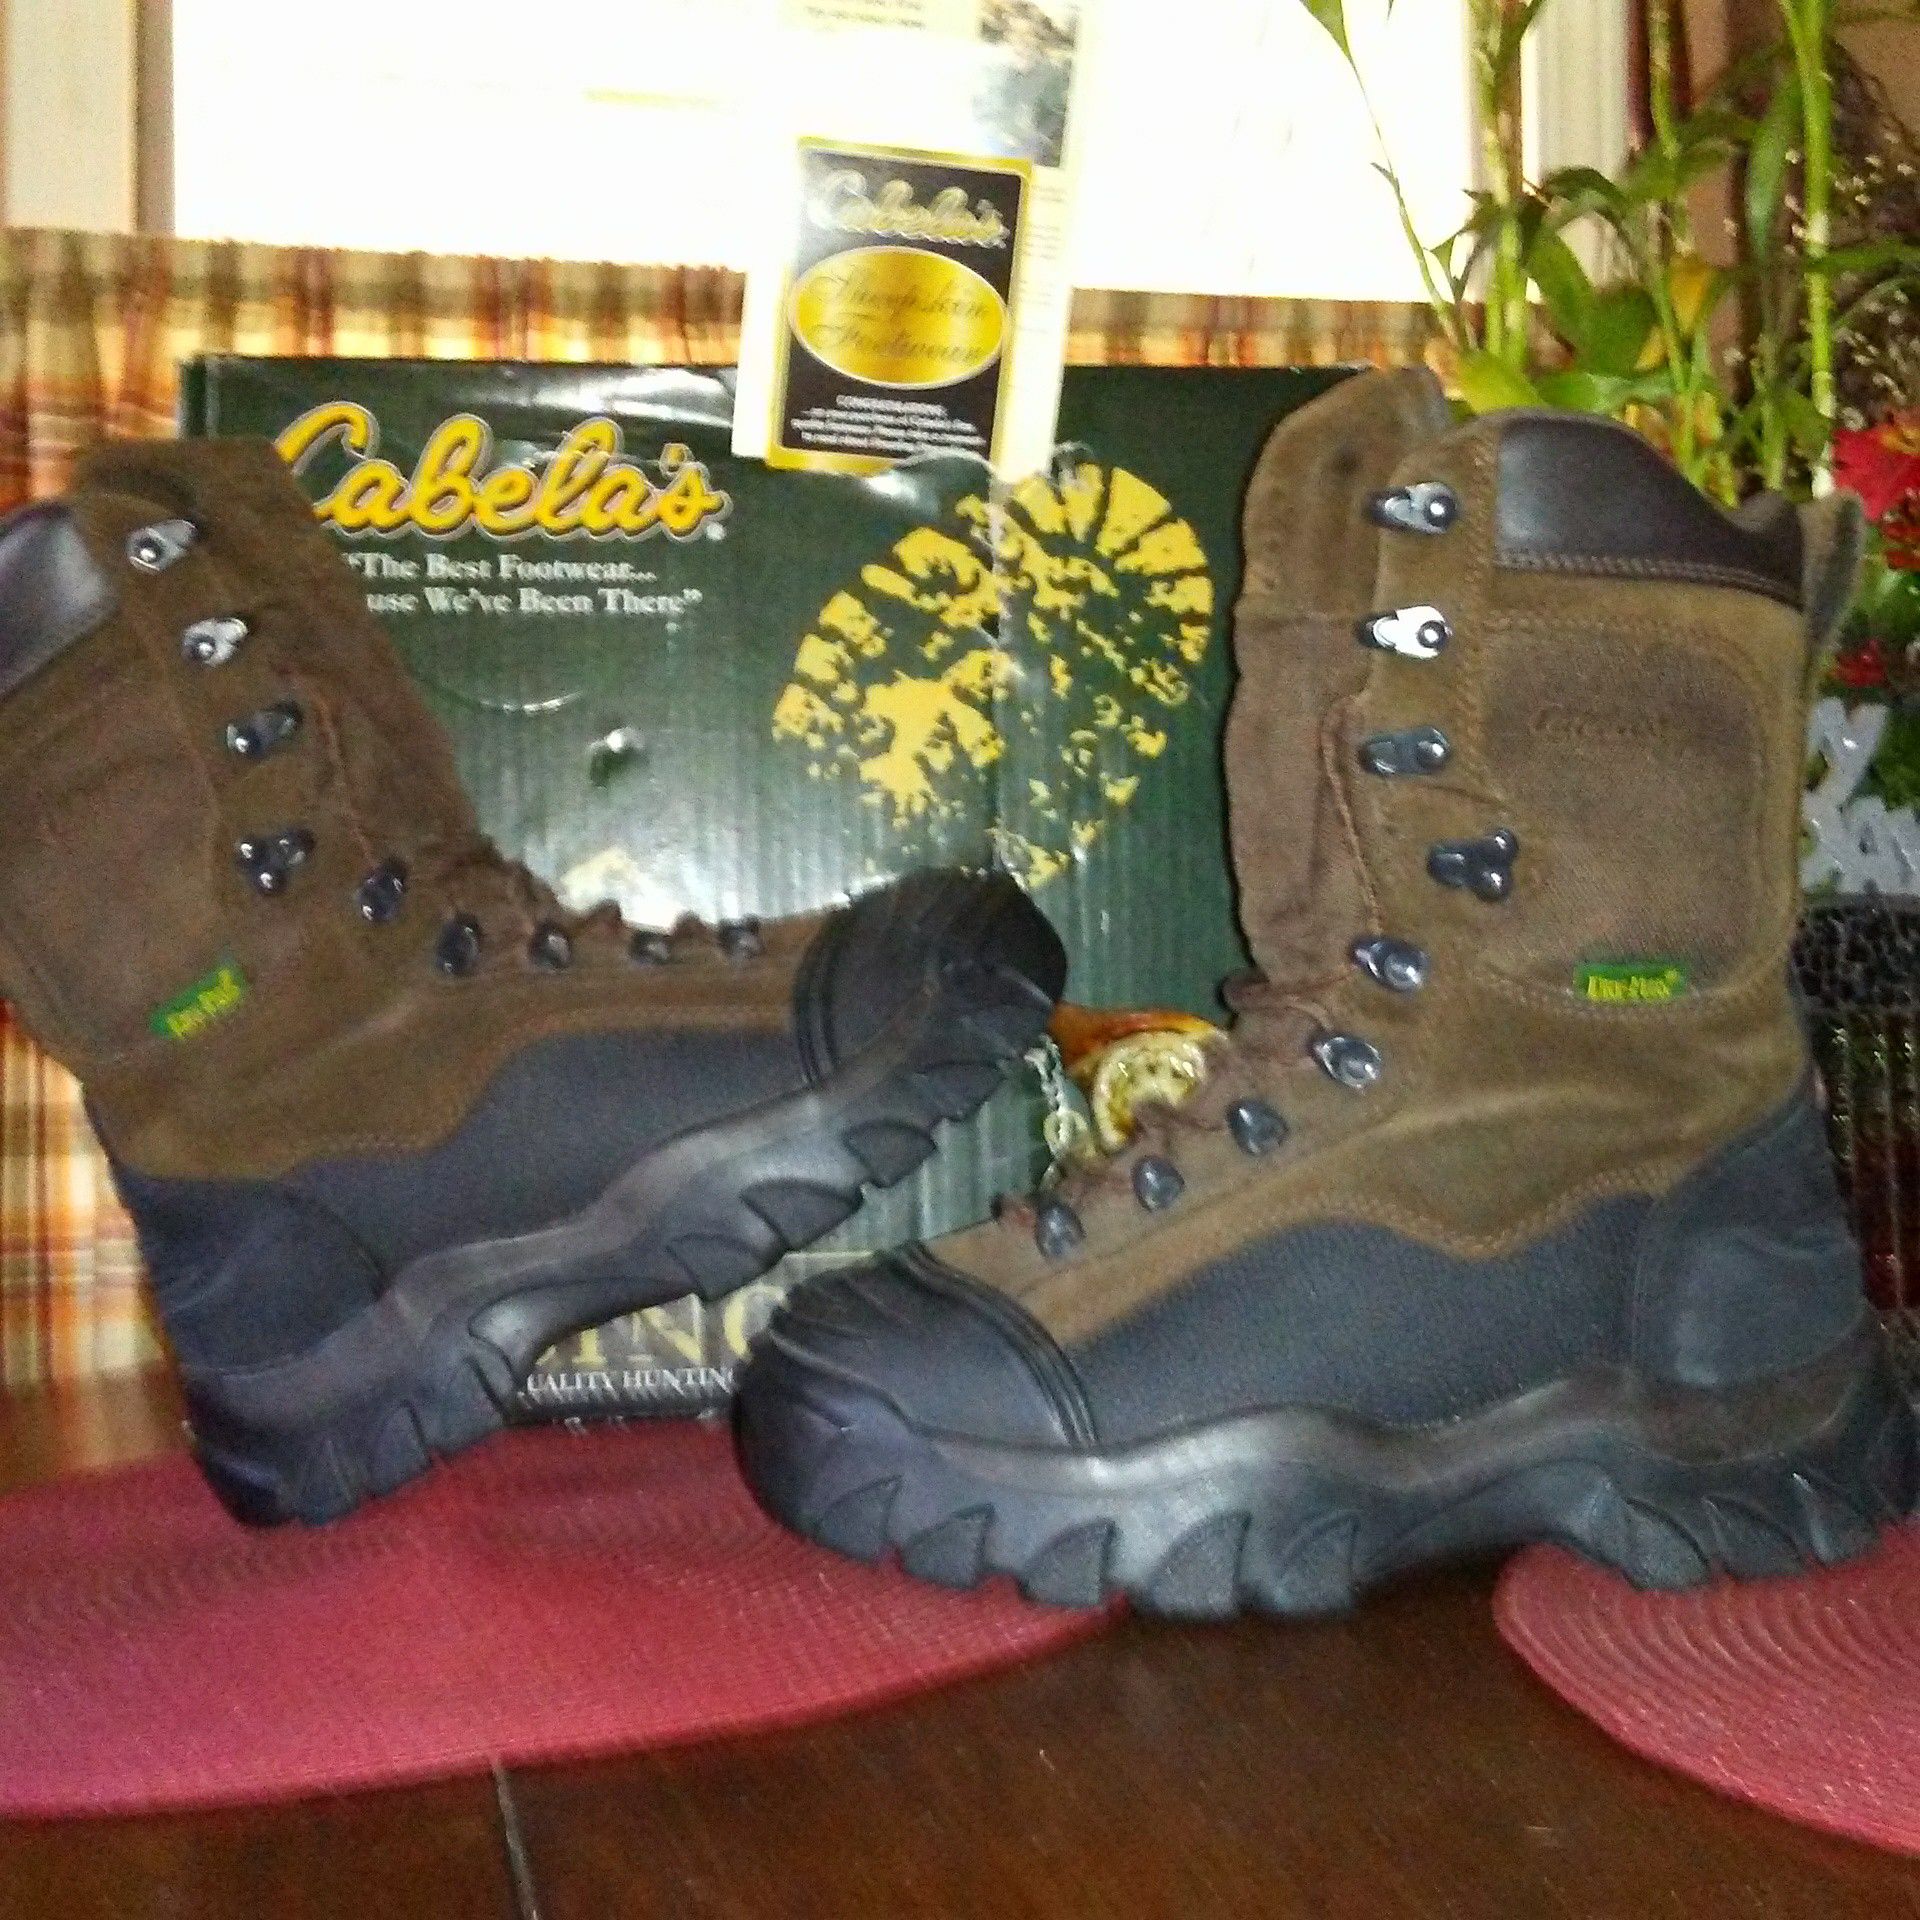 Cabellas insulated steel toed work boots